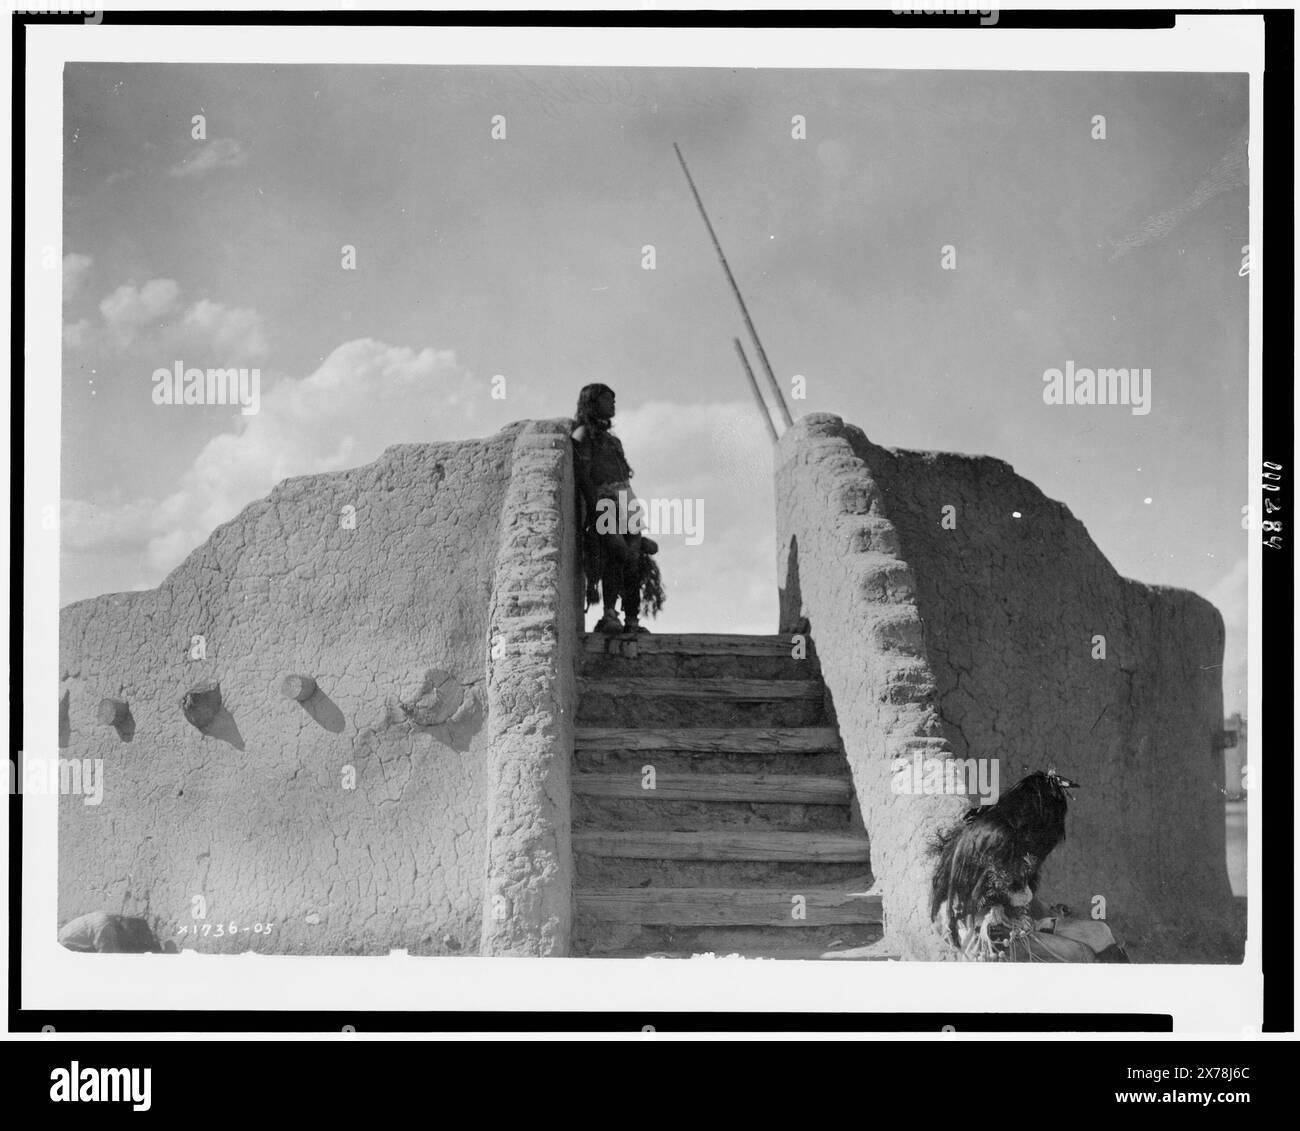 Guardia indiana Tewa in cima alle scale kiva, San Ildefonso, New Mexico, Edward S. Curtis Collection., Curtis n. 1736-05., pubblicato in: The North American Indian / Edward S. Curtis. [Seattle, Washington.] : Edward S. Curtis, 1907-30, supplente, v. 17, PL. 584.. Indians of North America, New Mexico, San Ildefonso Pueblo, Spiritual Life, 1900-1910. , Indians of North America, New Mexico, San Ildefonso Pueblo, Structures, 1900-1910. , Tewa Indians, Spiritual Life, 1900-1910. , Tewa Indians, Structures, 1900-1910. , Scalinate, nuovo Messico, San Ildefonso Pueblo, 1900-1910. Foto Stock